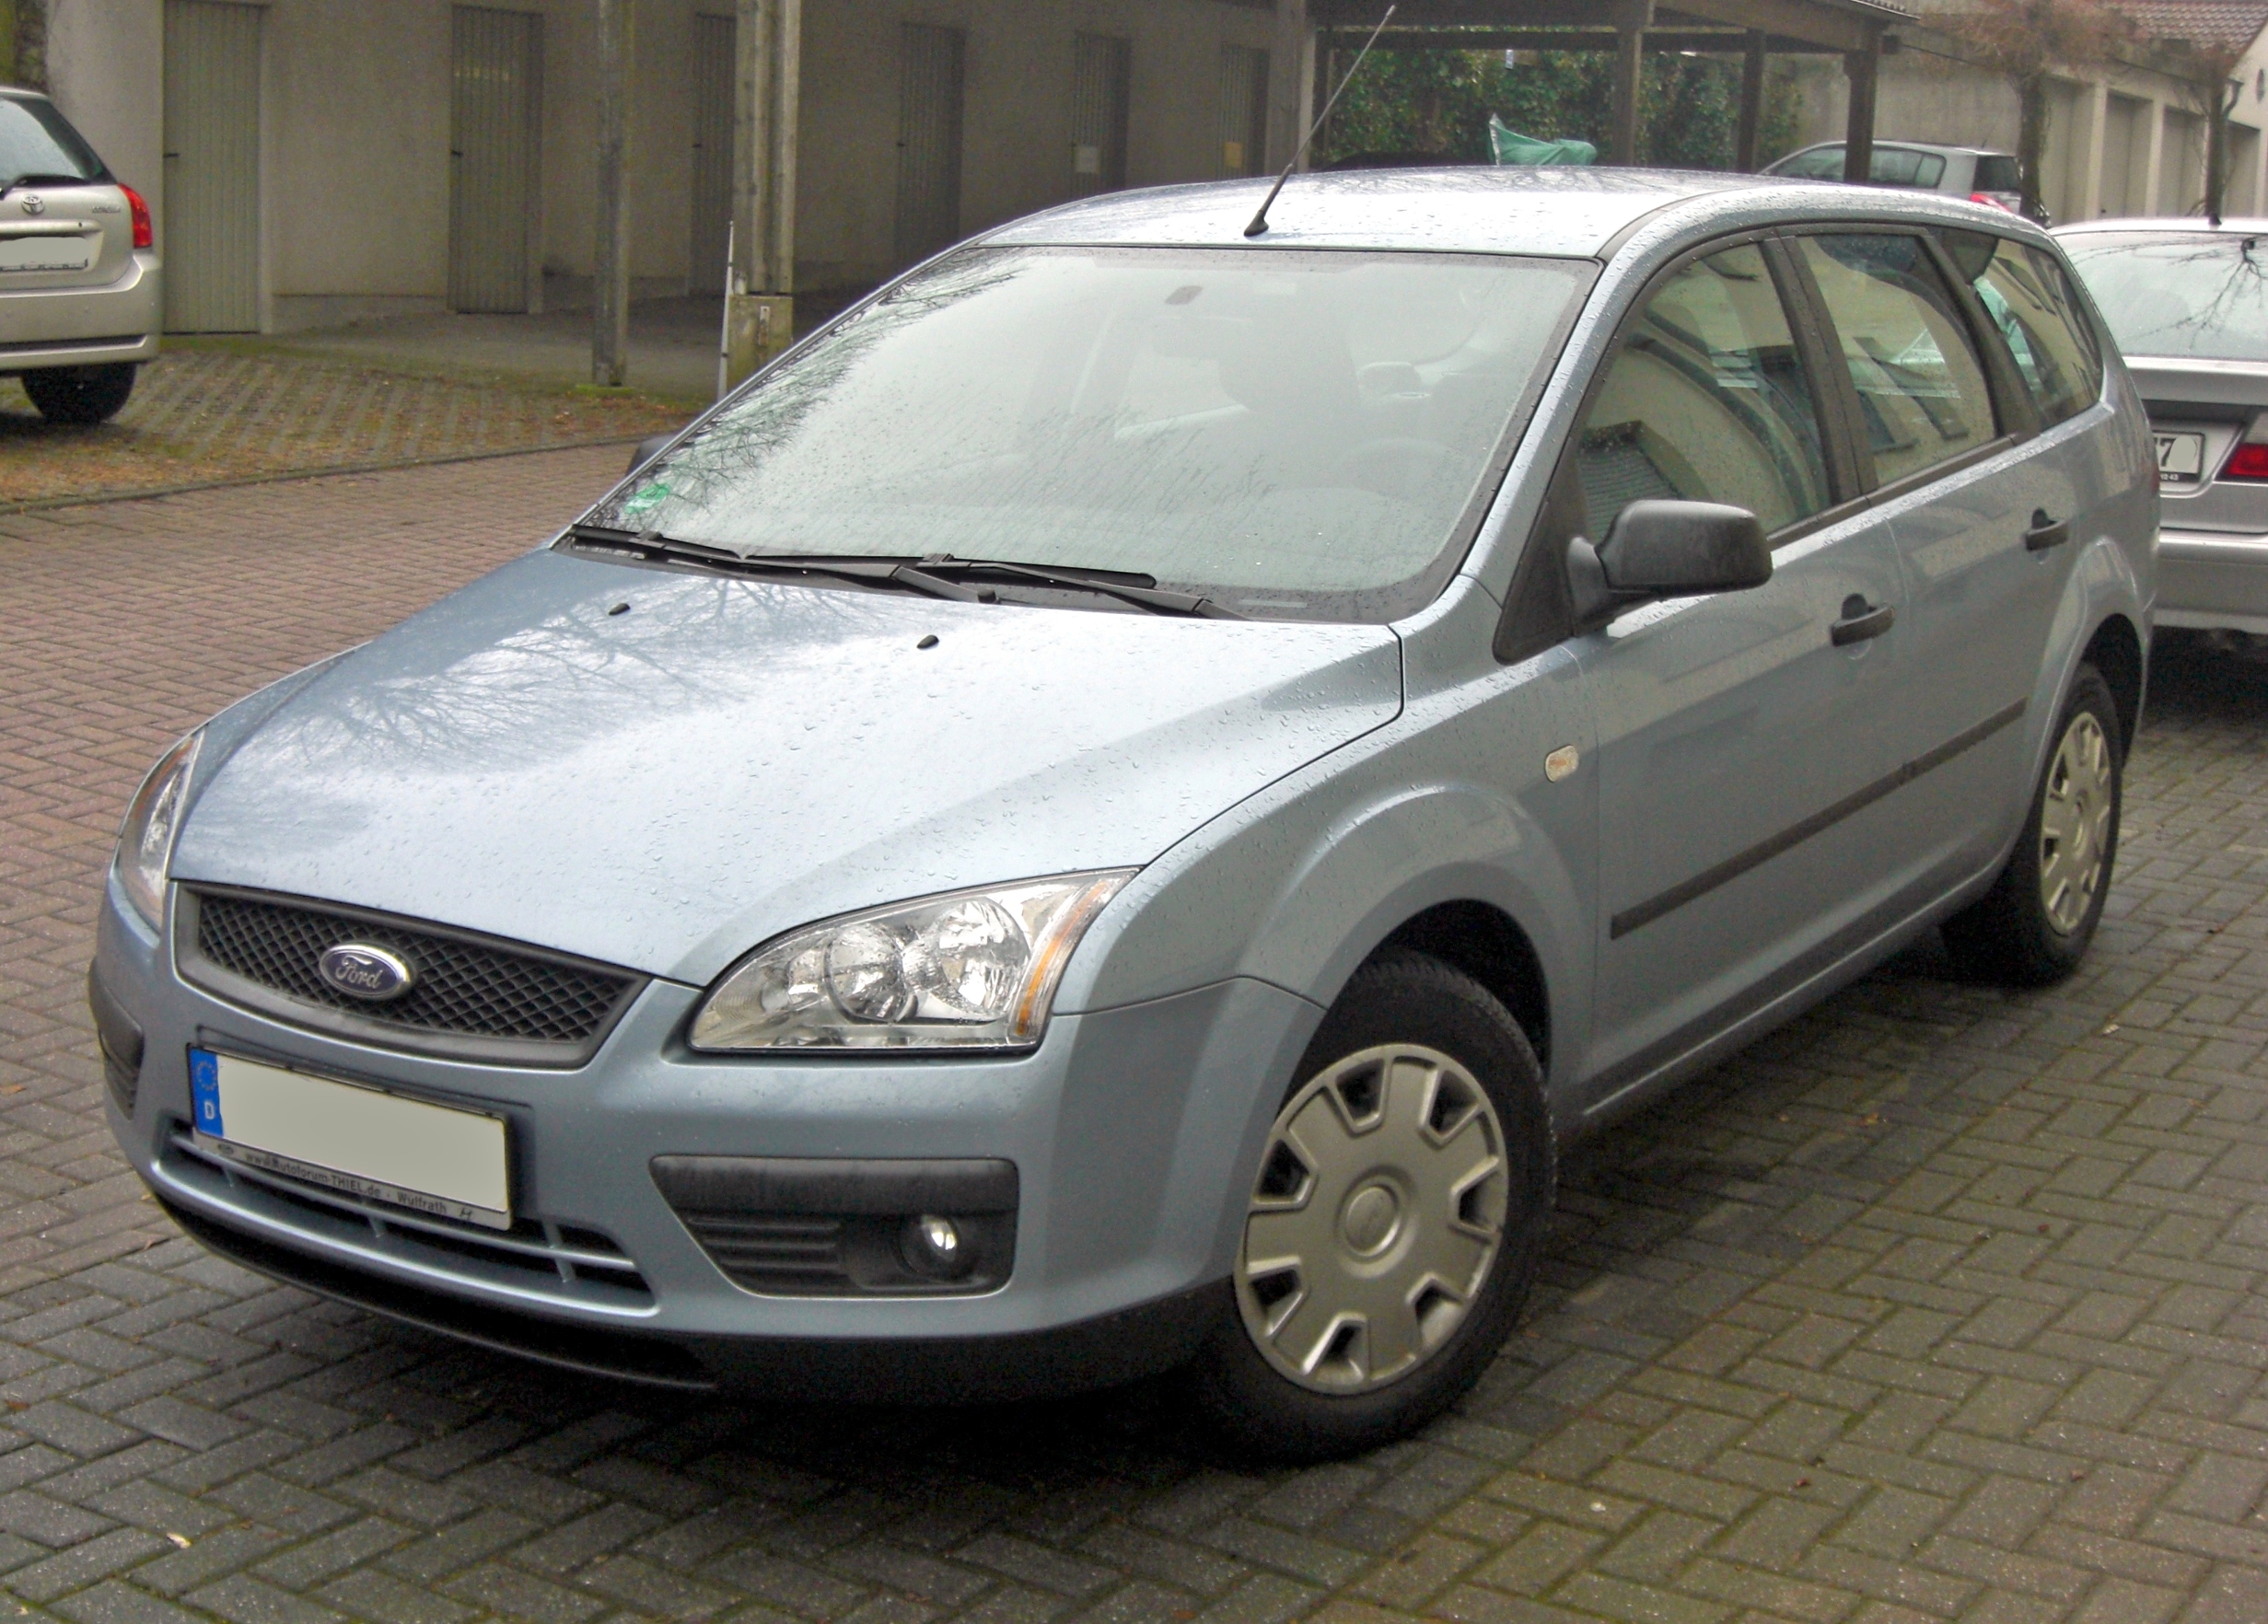 File:Ford Focus Turnier front-1.jpg - Wikipedia